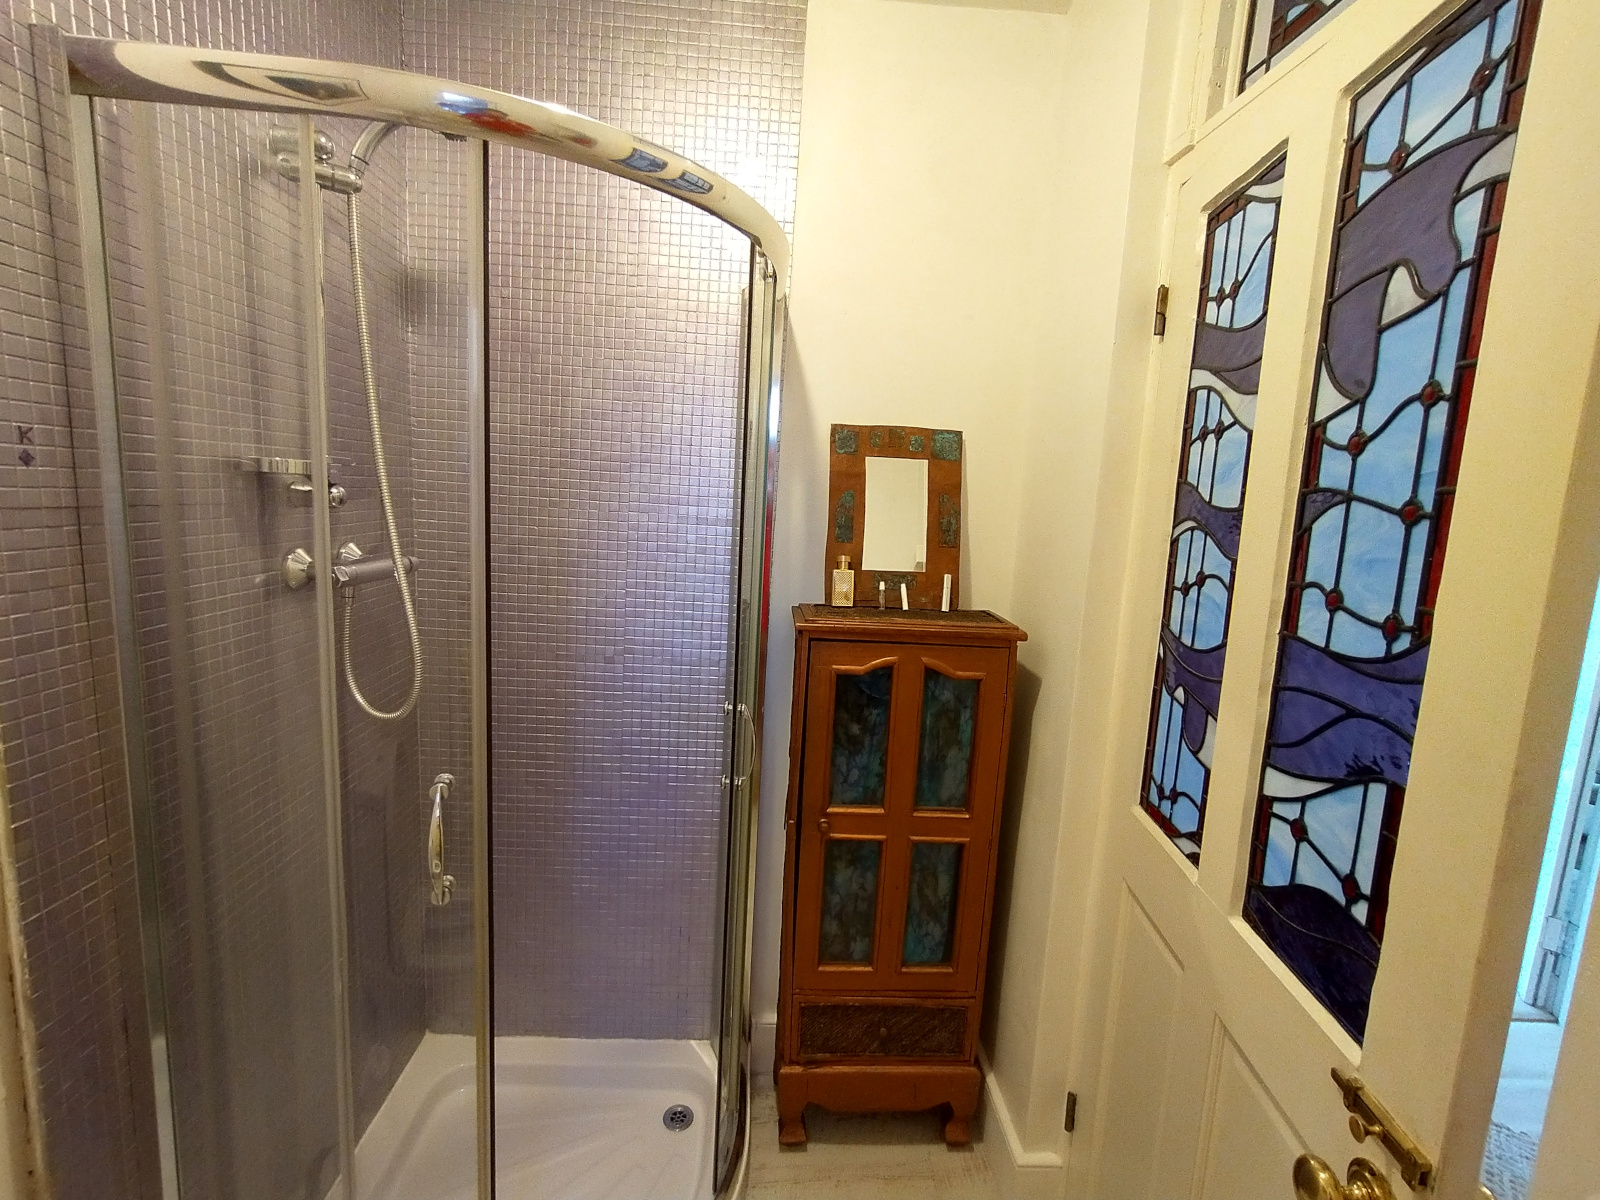 Bathroom with large shower cubicle, interestingly decorated with stained glass in the door